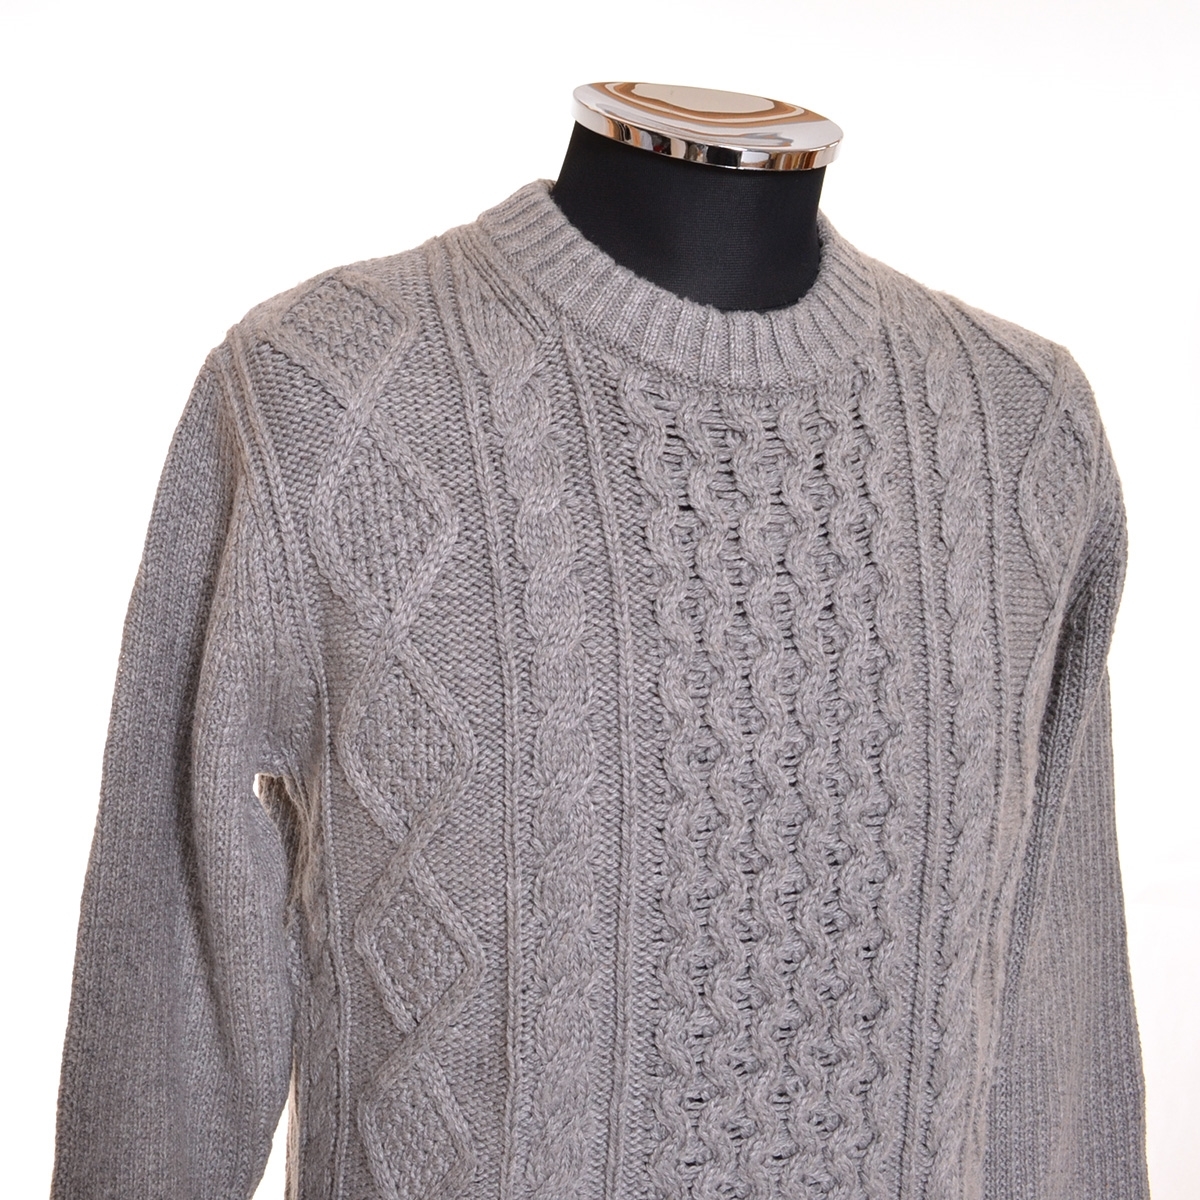 0469713 UNIQLO Uniqlo 0 cable knitted Alain pattern sweater size M wool Blend men's gray 